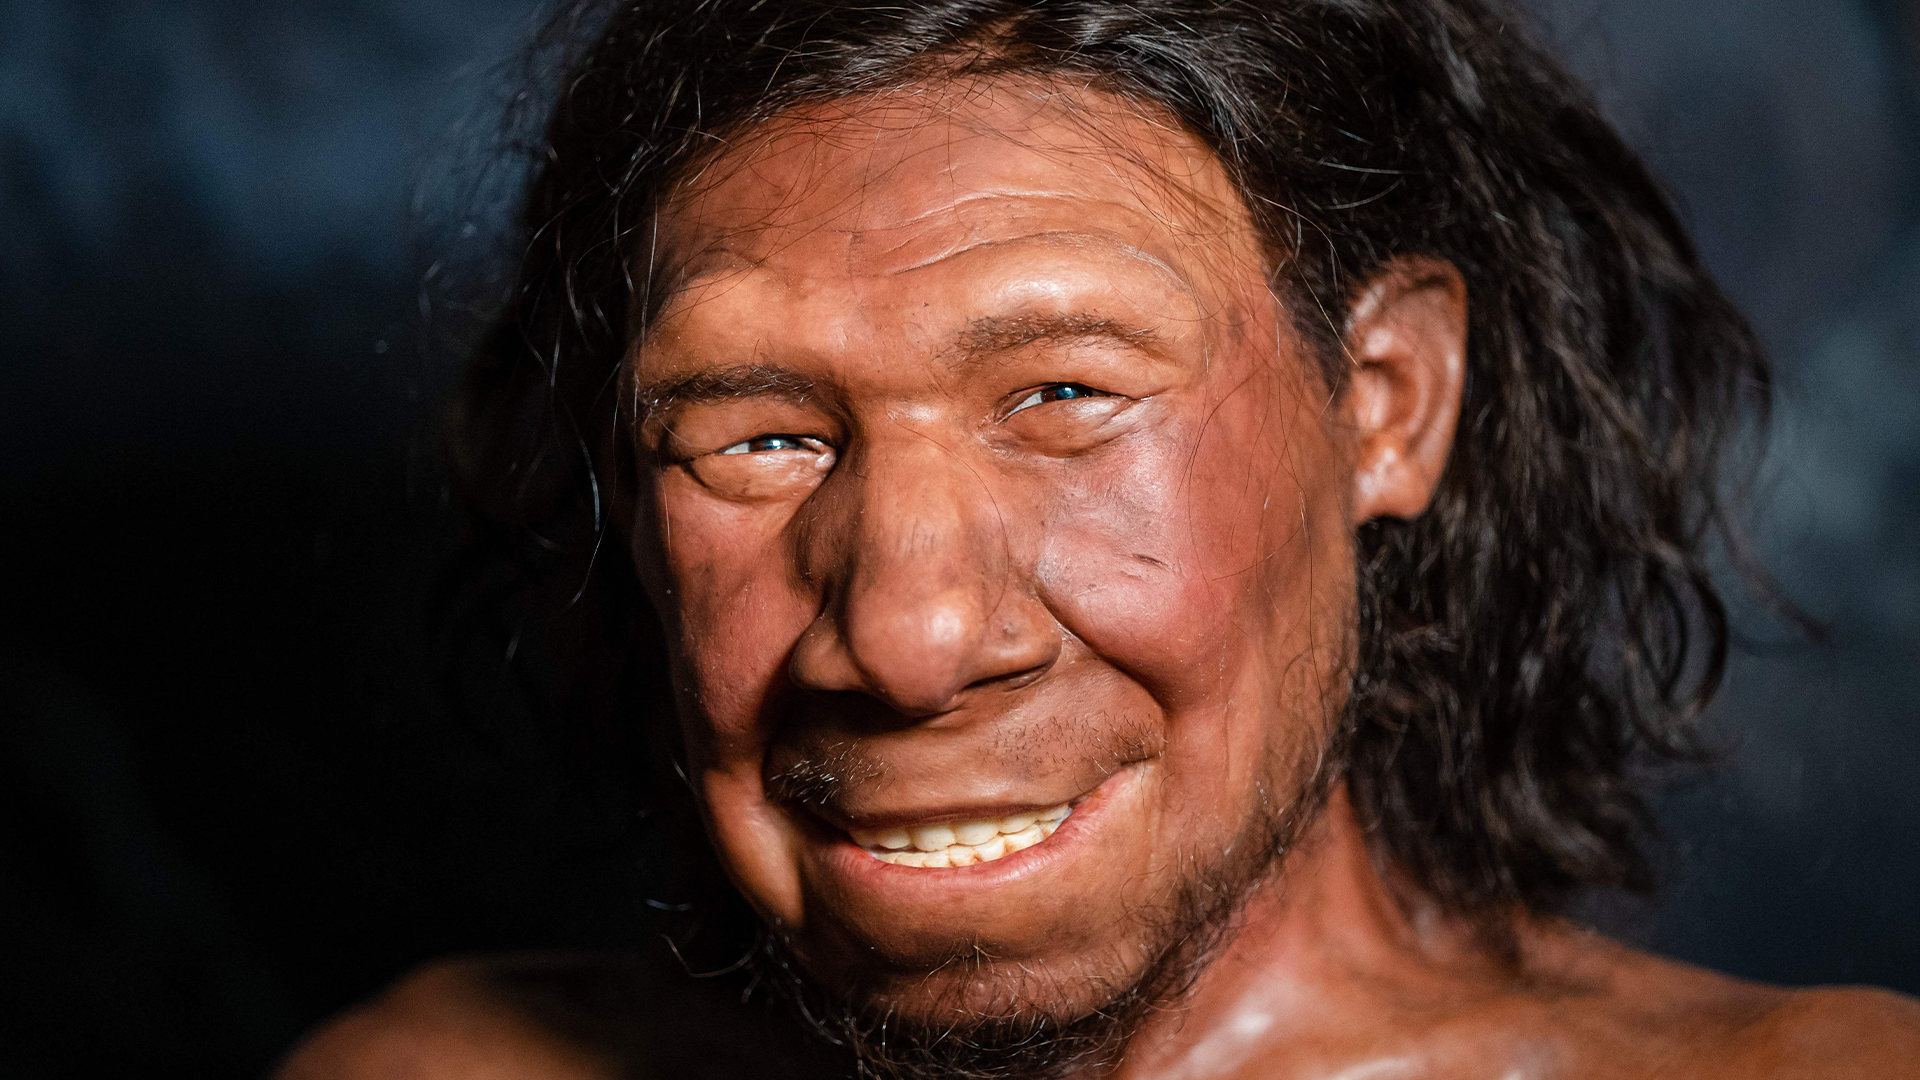 Neanderthals: Our extinct human relatives | Live Science